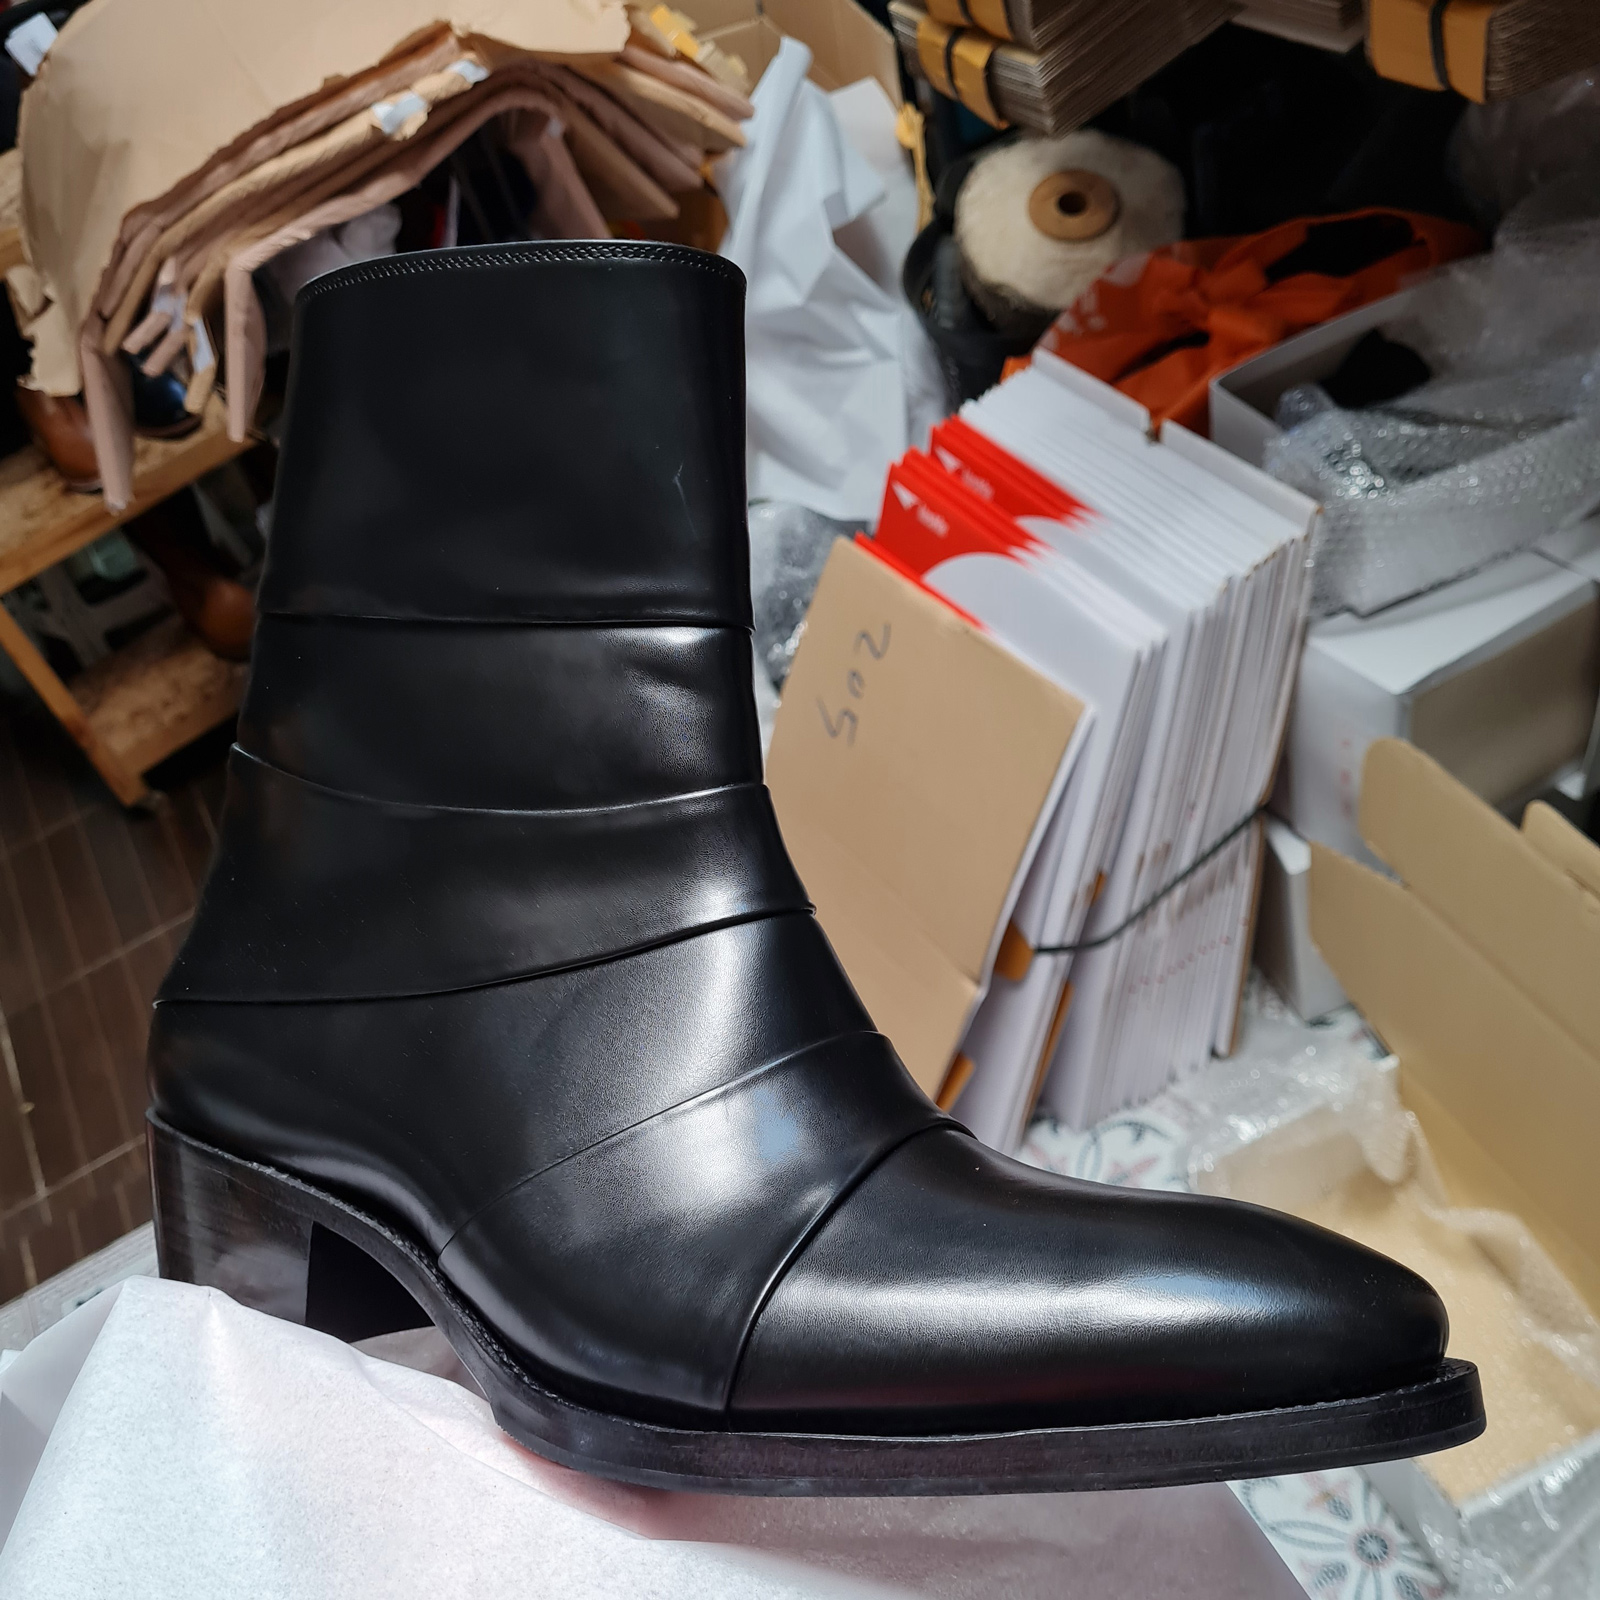 Production photos of elevator shoes and bespoke shoes - Don's Footwear